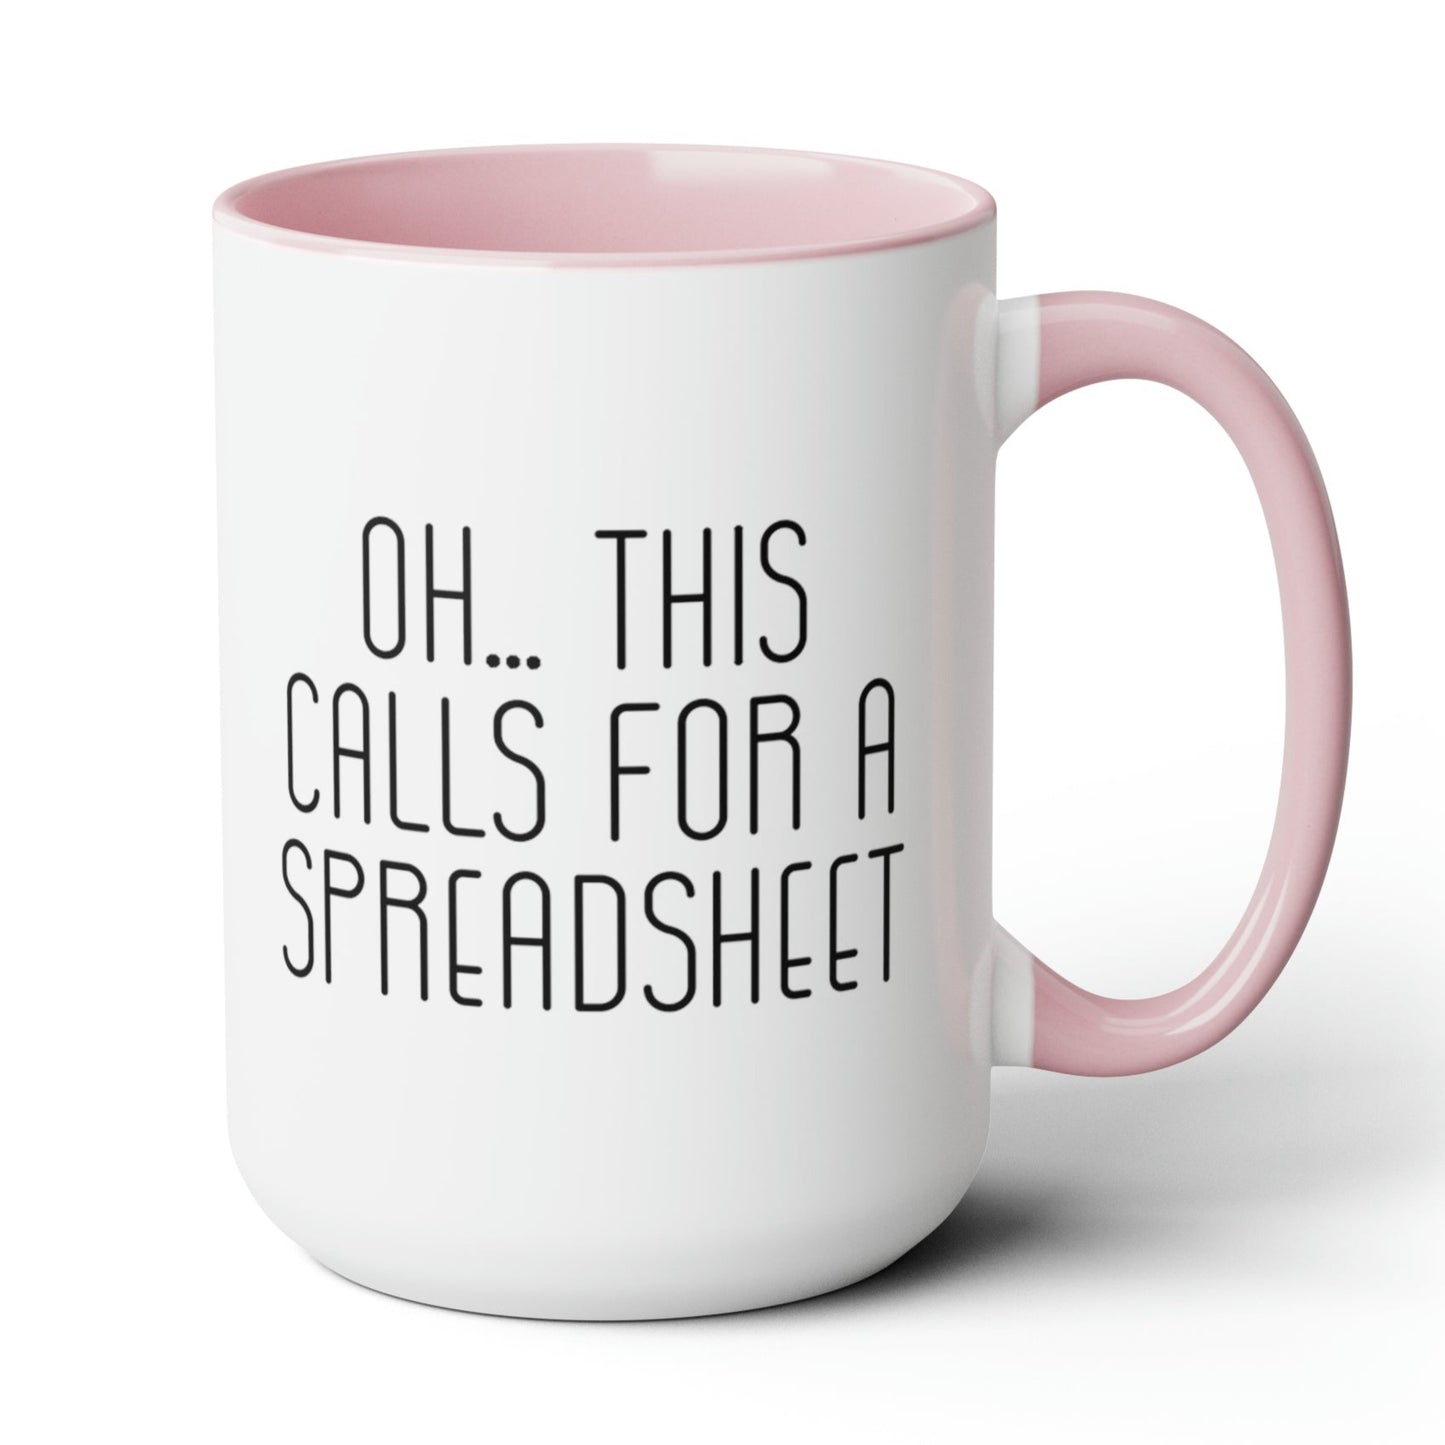 Oh this Calls for a Spreadsheet Two-Tone Coffee Mug, 15oz